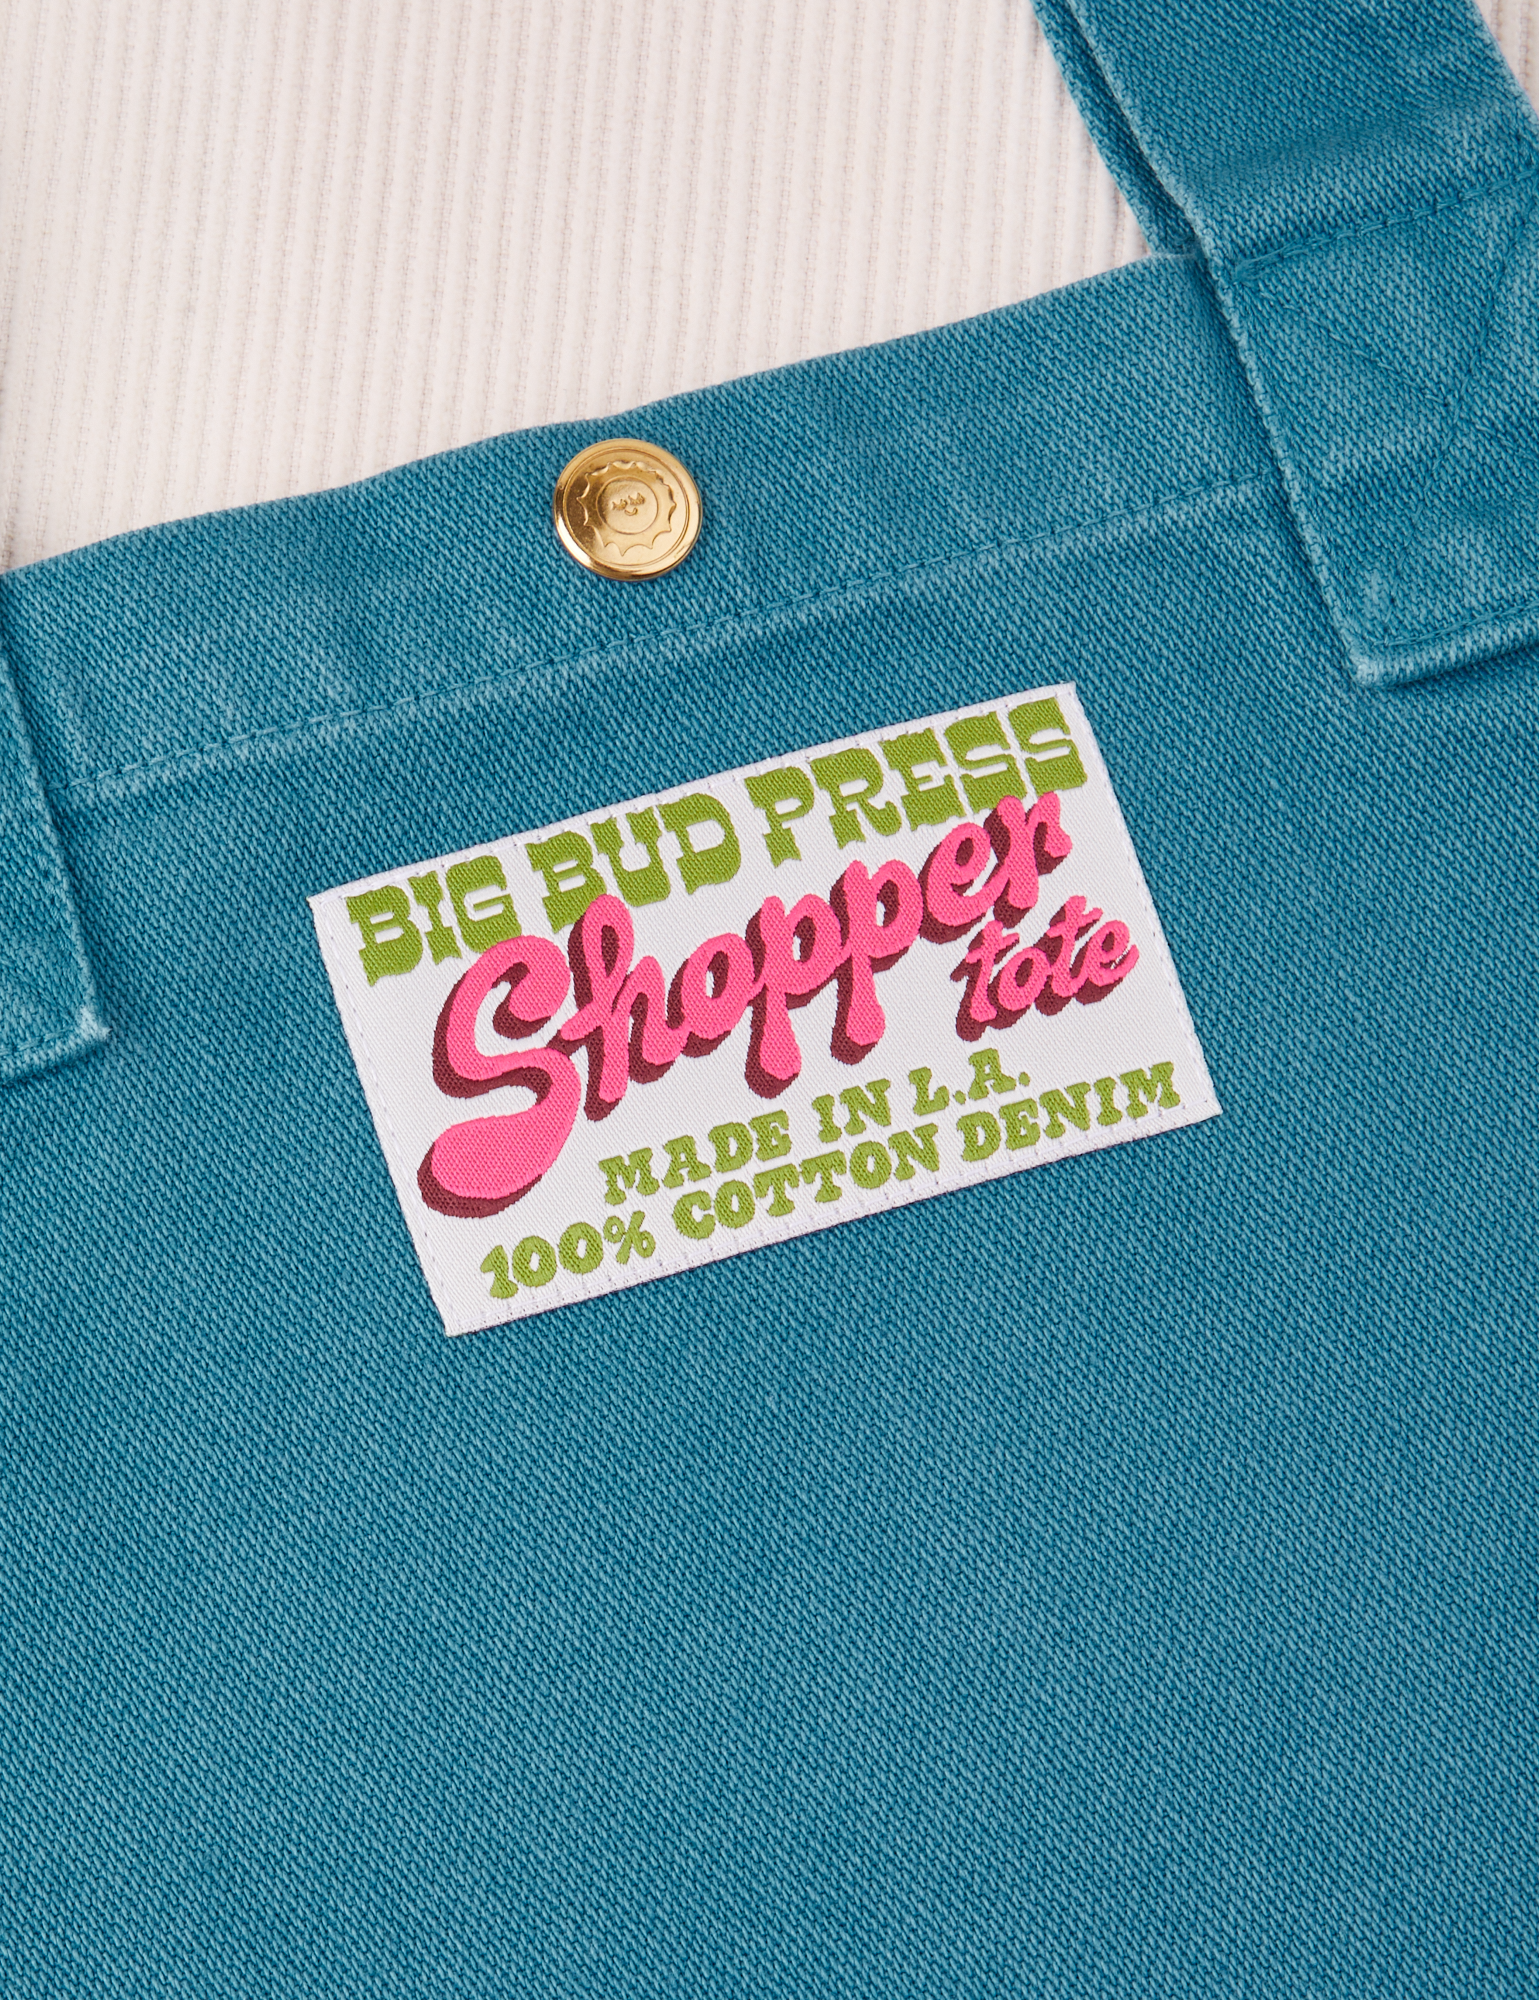 Sun Baby brass snap on Shopper Tote Bag in Marine Blue. Bag label with green and pink text that reads &quot;Big Bud Press Shopper Tote, Made in L.A., 100% Cotton Denim&quot; on white background